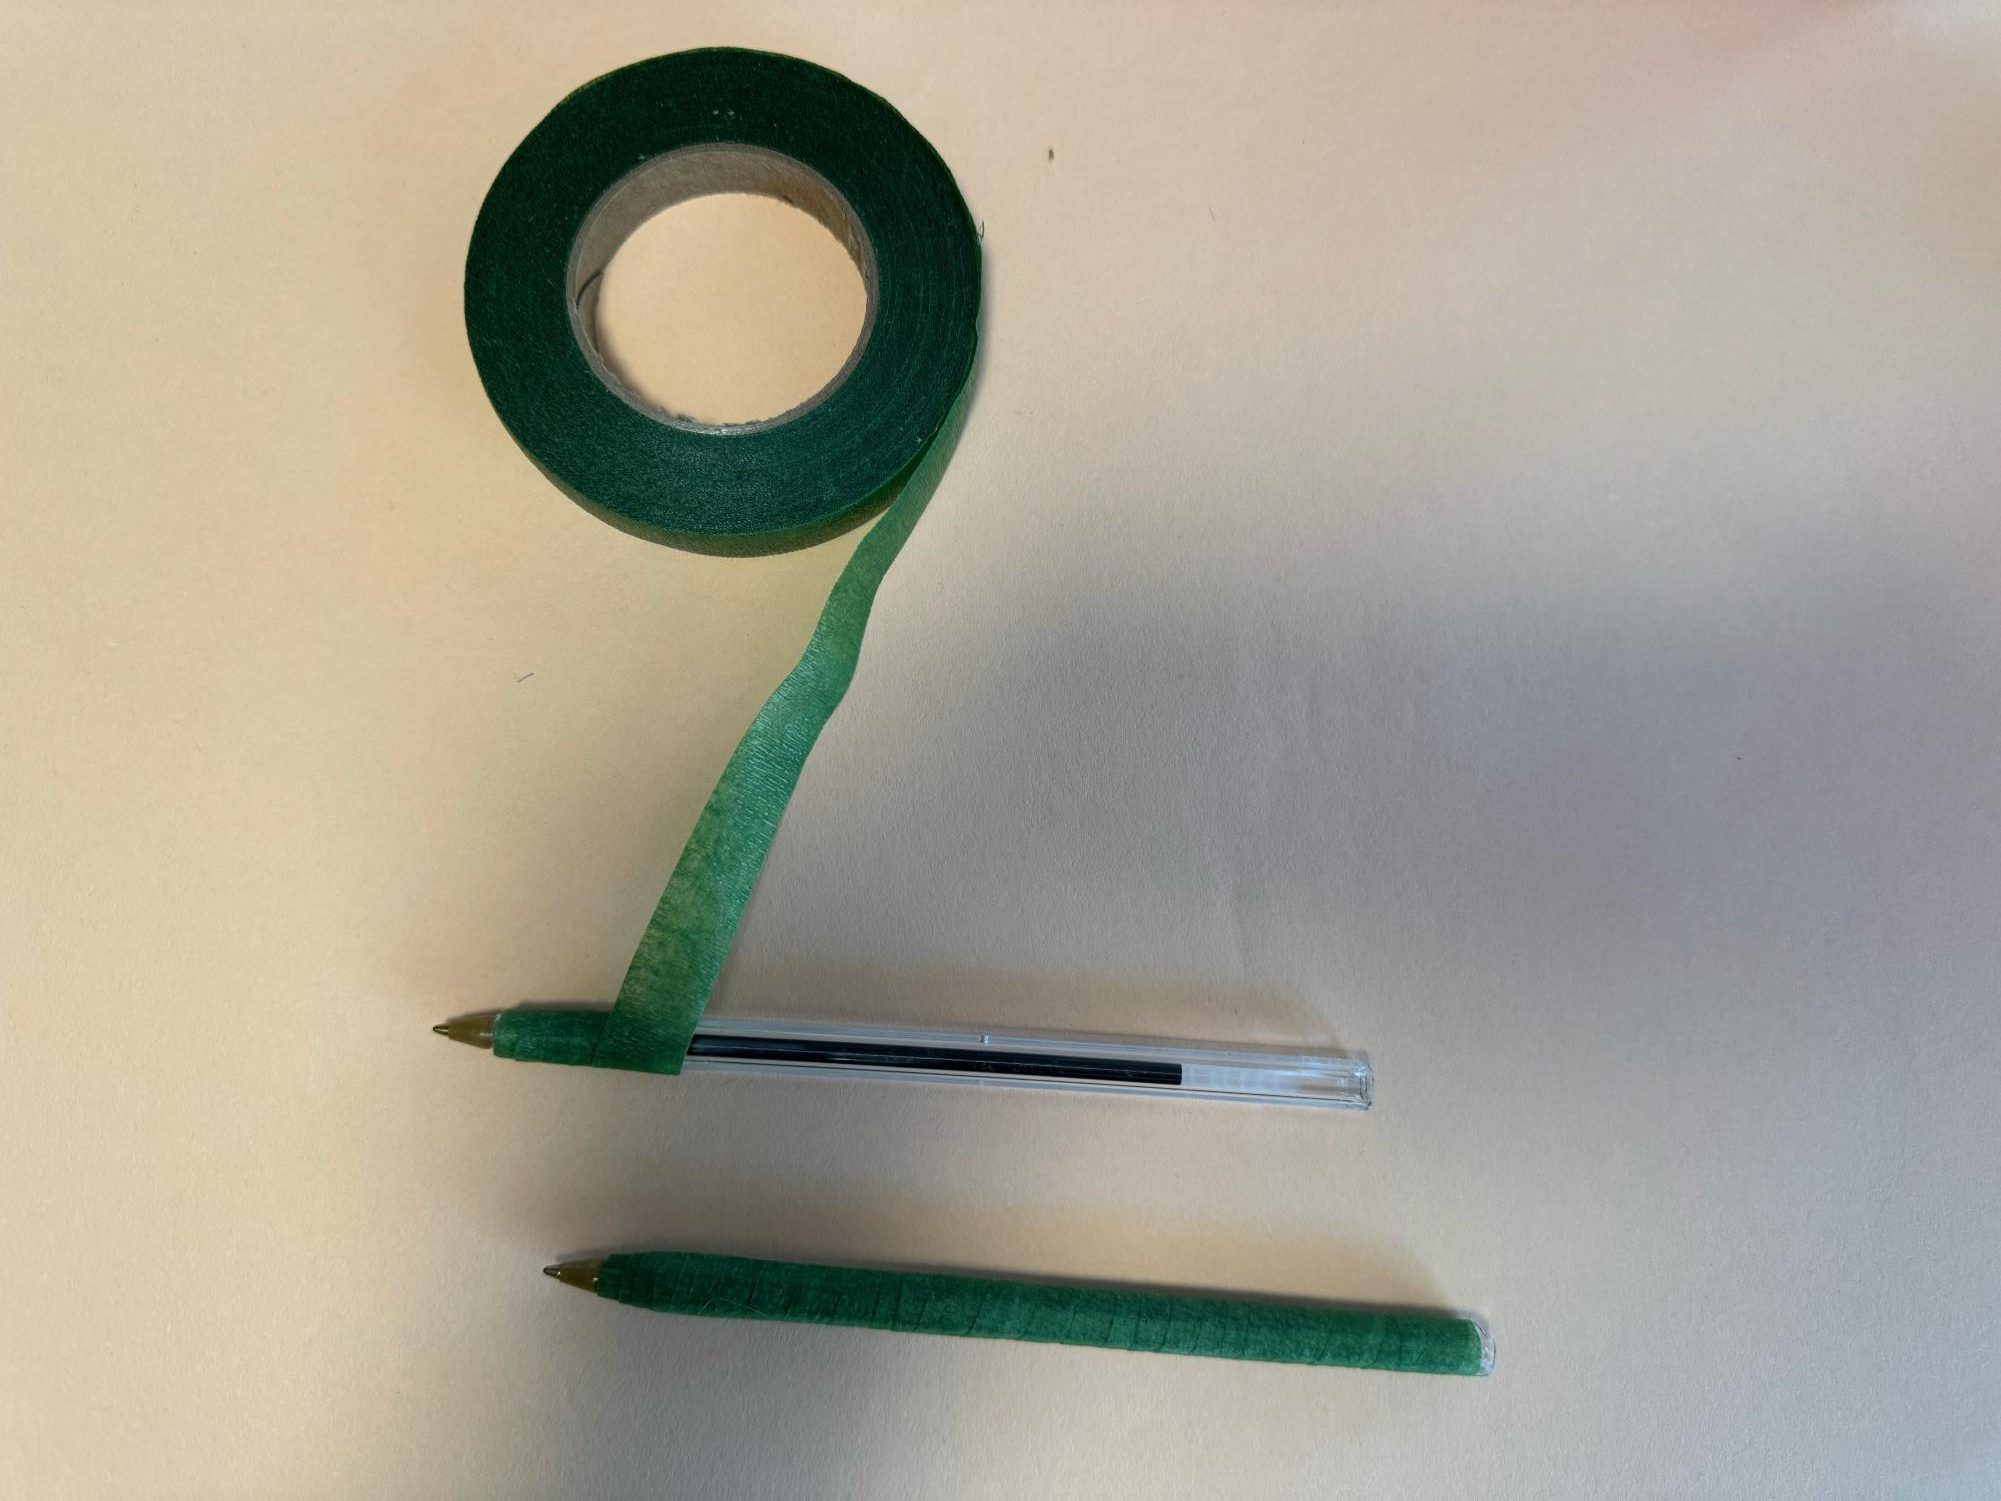 Step 2: wrap the green tape around the pen.